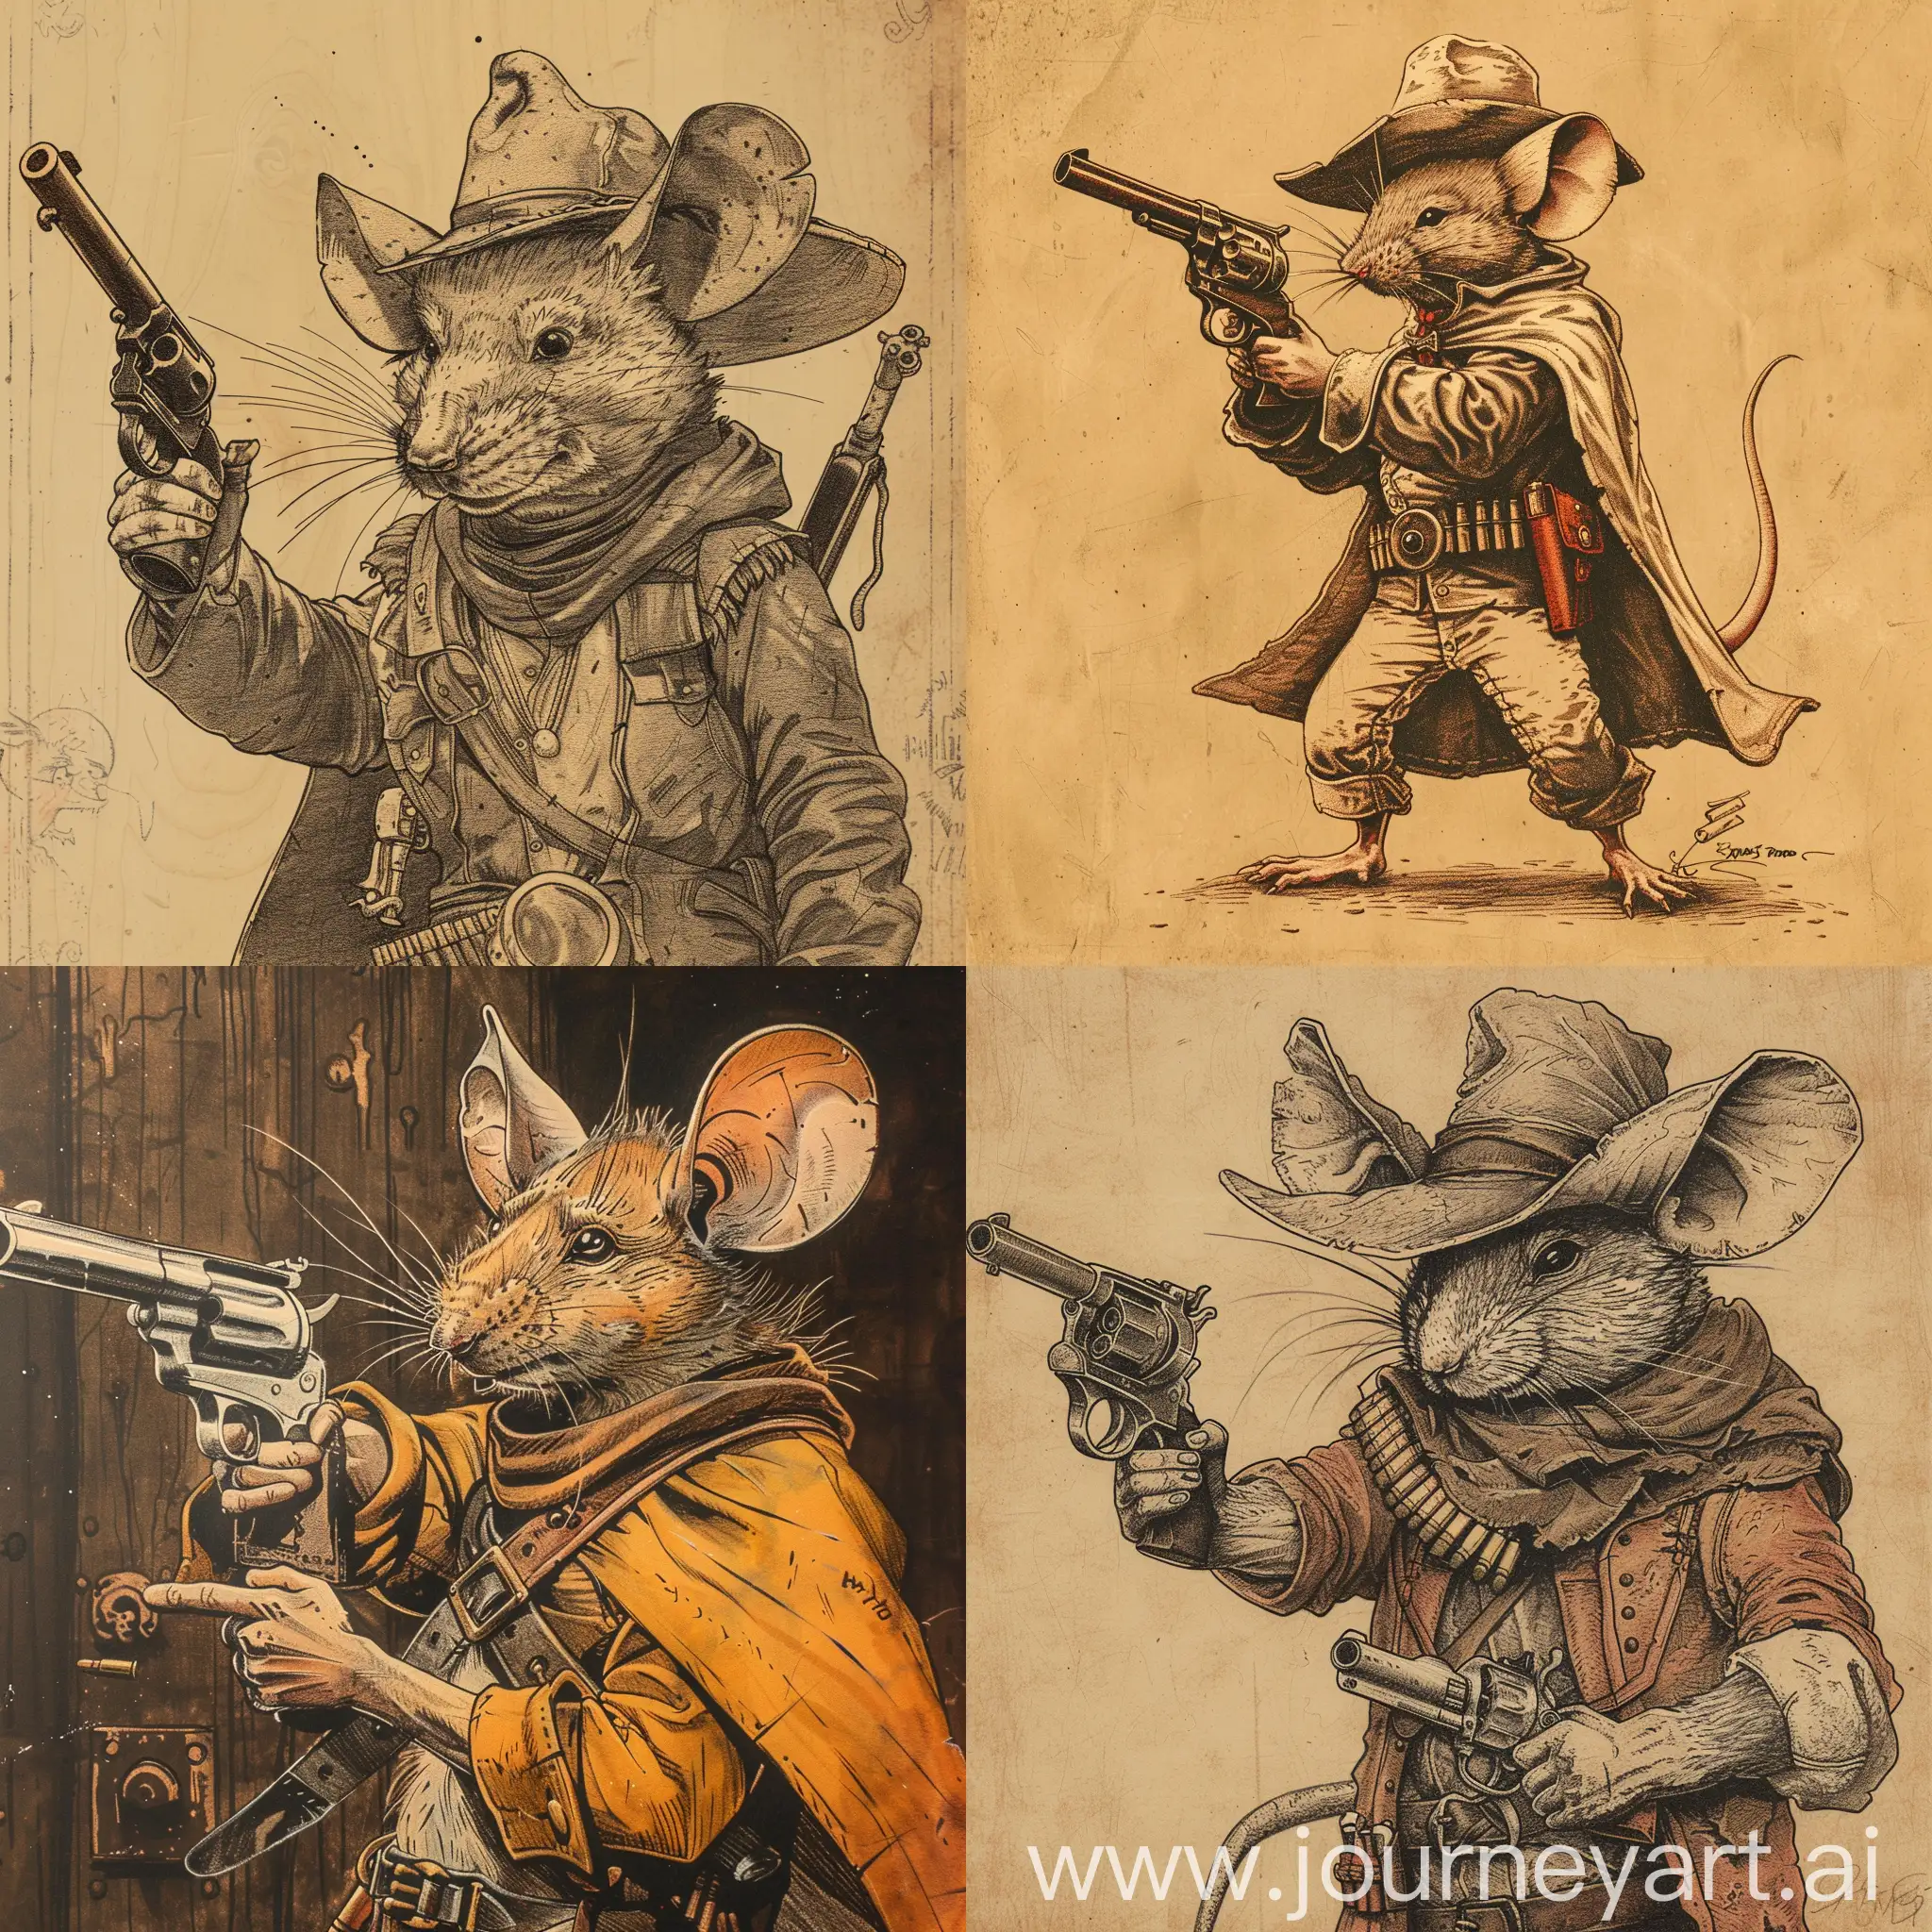 1970's dark fantasy book cover paper art dungeons and dragons style drawing of a mouse in gunslinger attire holding a revolver